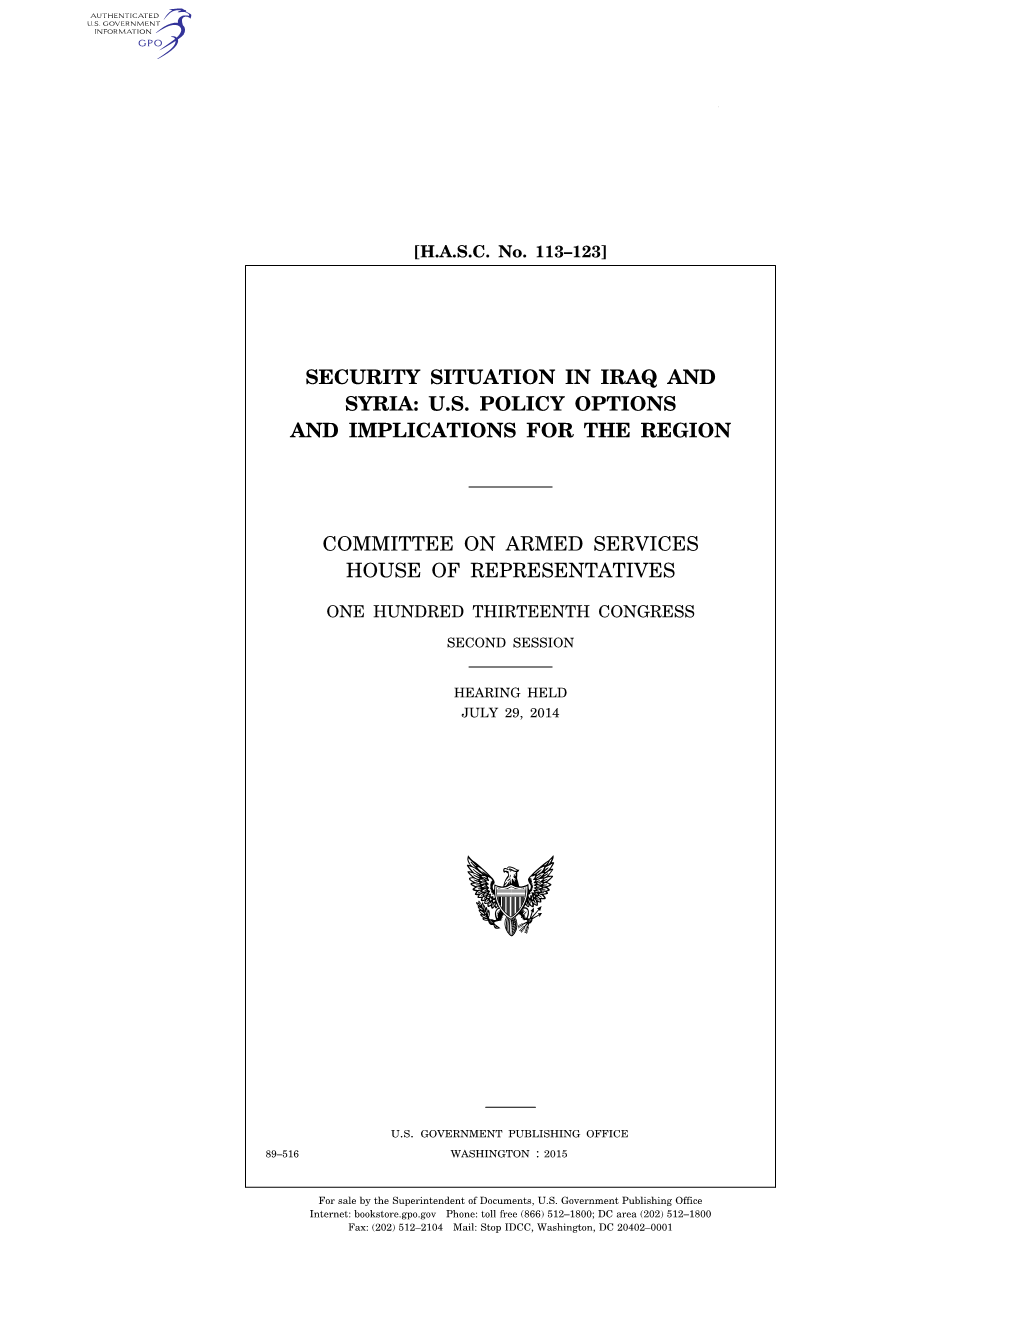 Security Situation in Iraq and Syria: Us Policy Options and Implications for the Region Committee on Armed Services House of Representatives